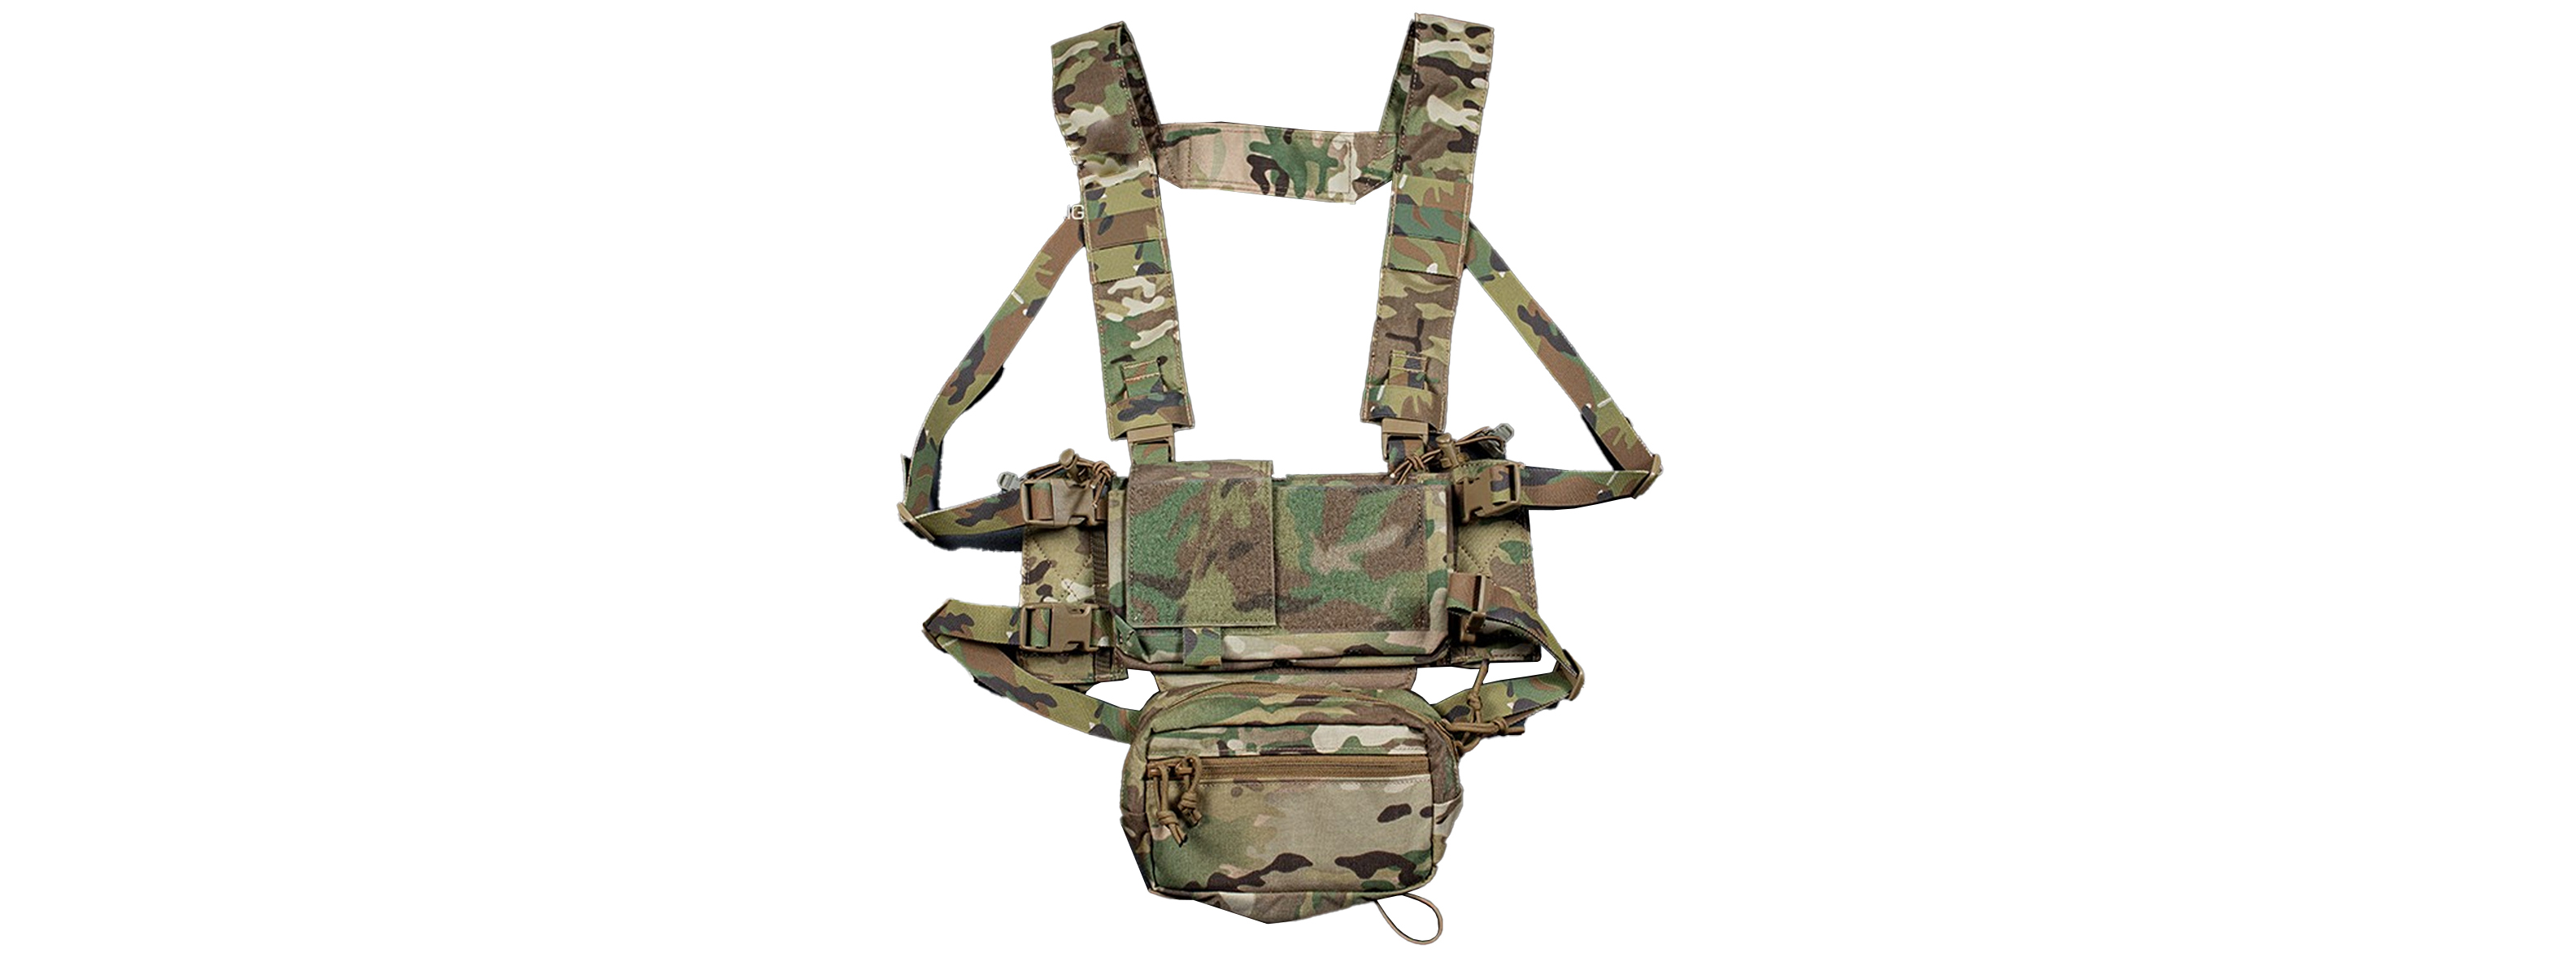 MK4 Tactical Chest Rig Carrier - (Camo)